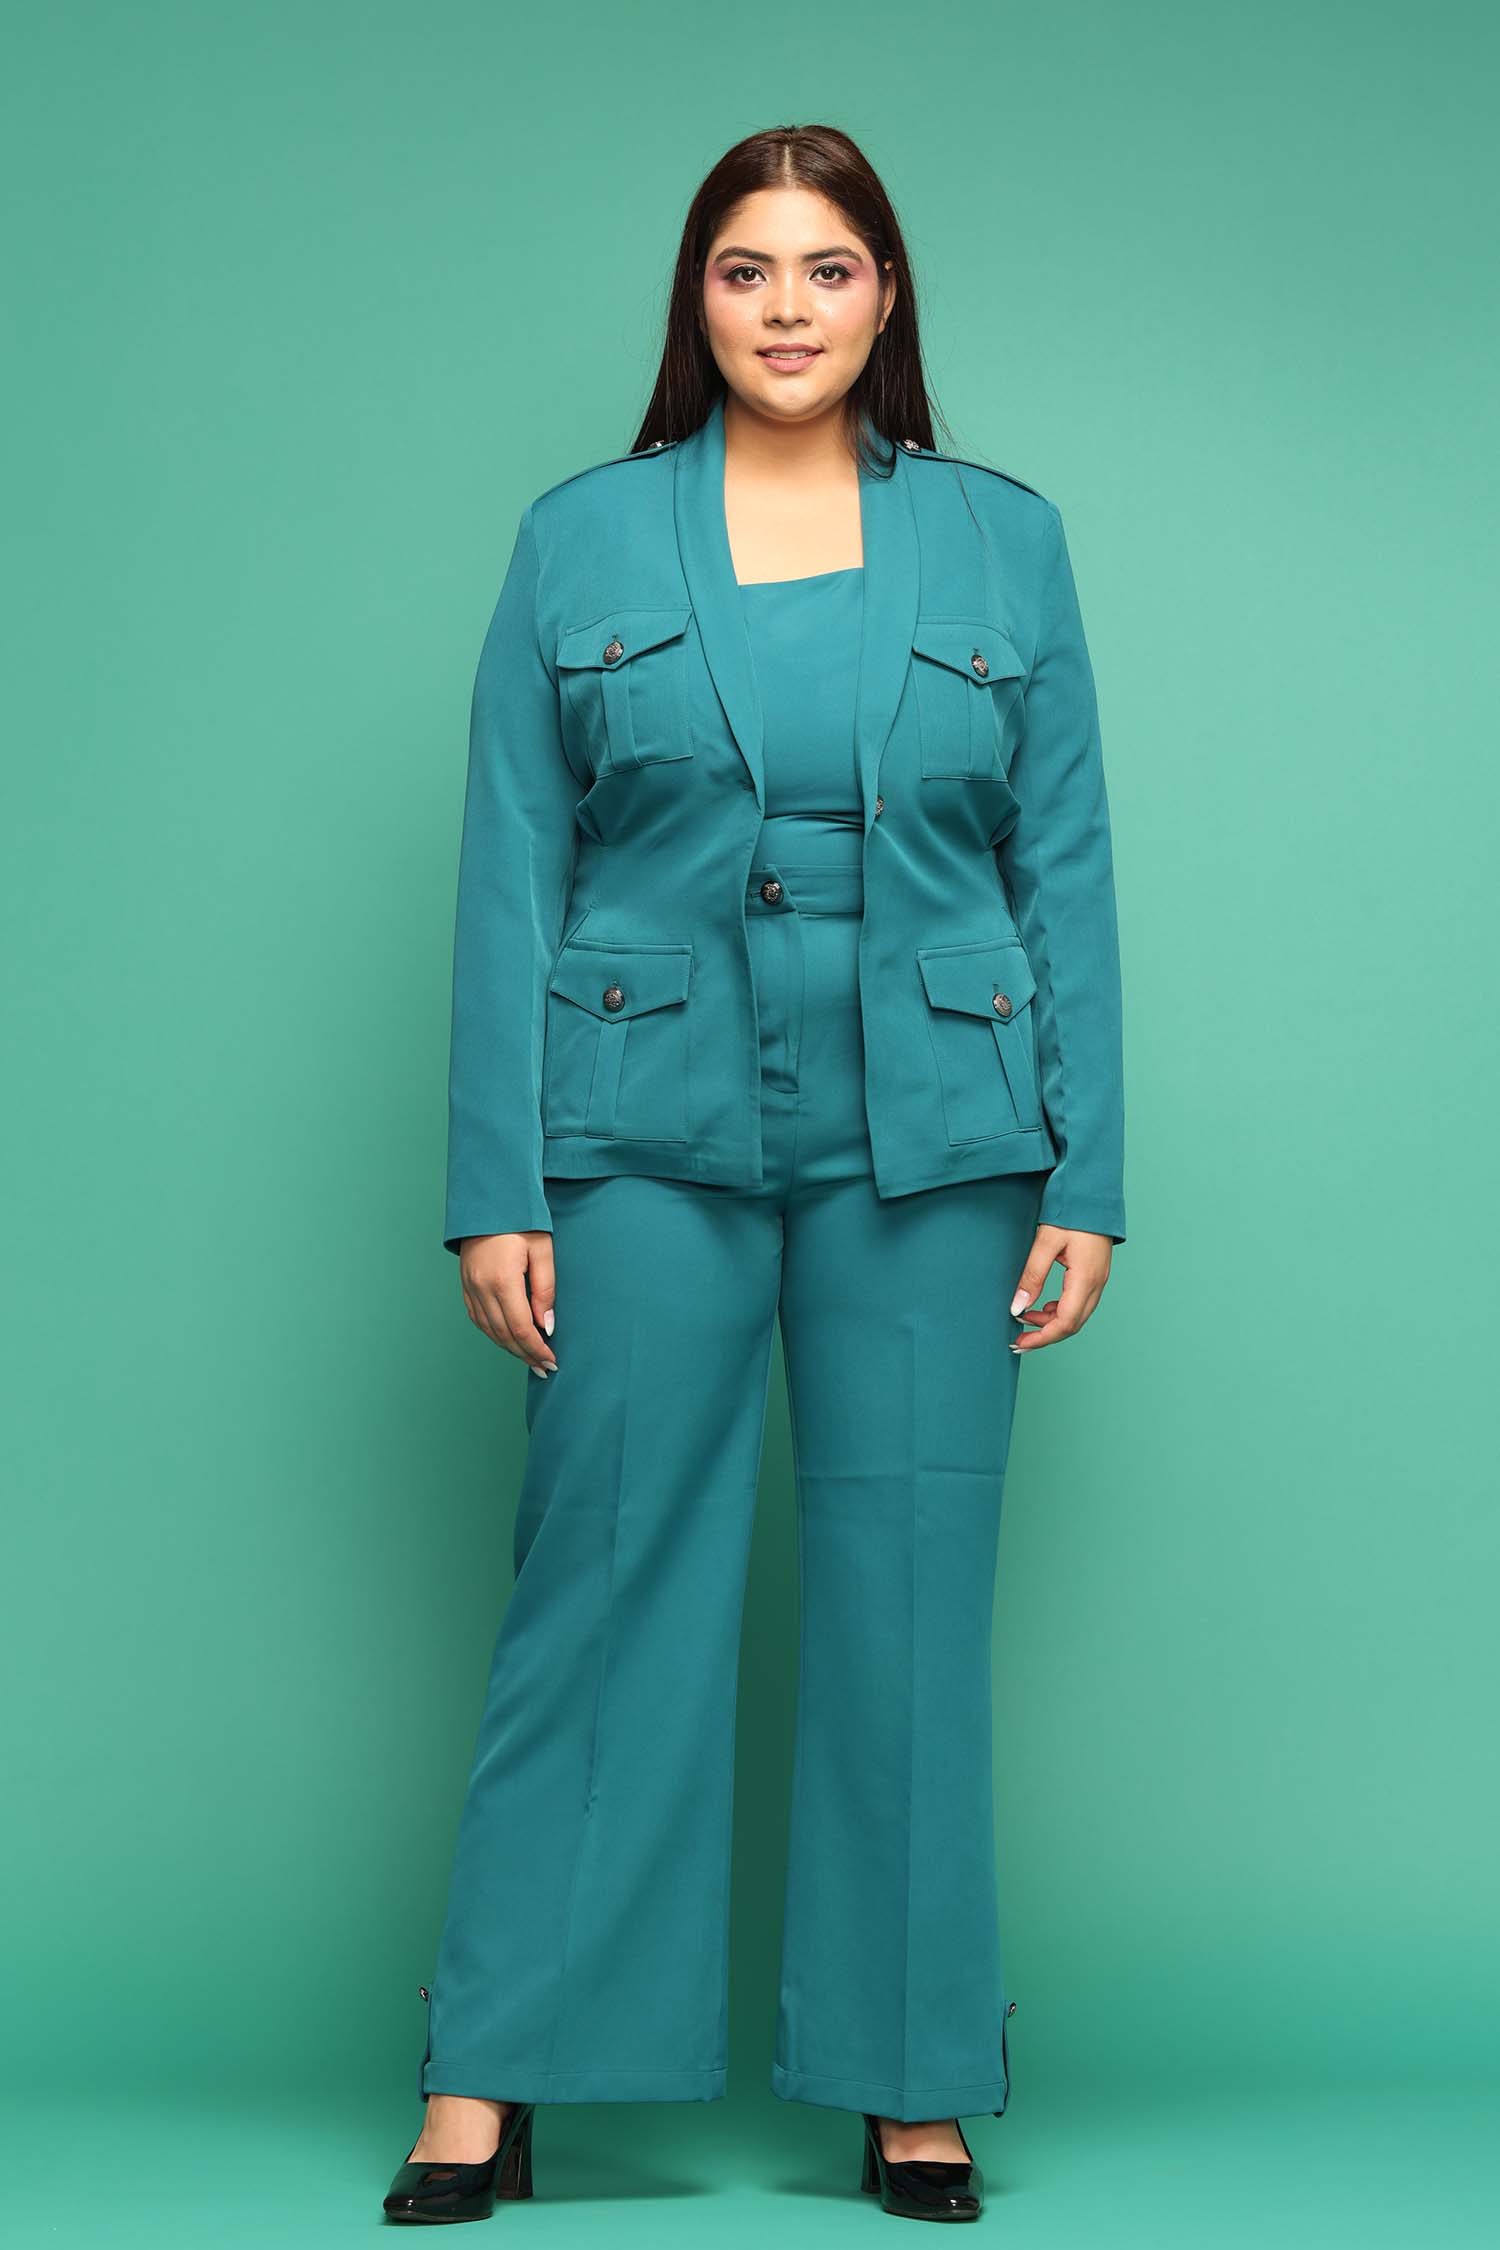 Box Pleated Teal Blue Blazer With Trousers